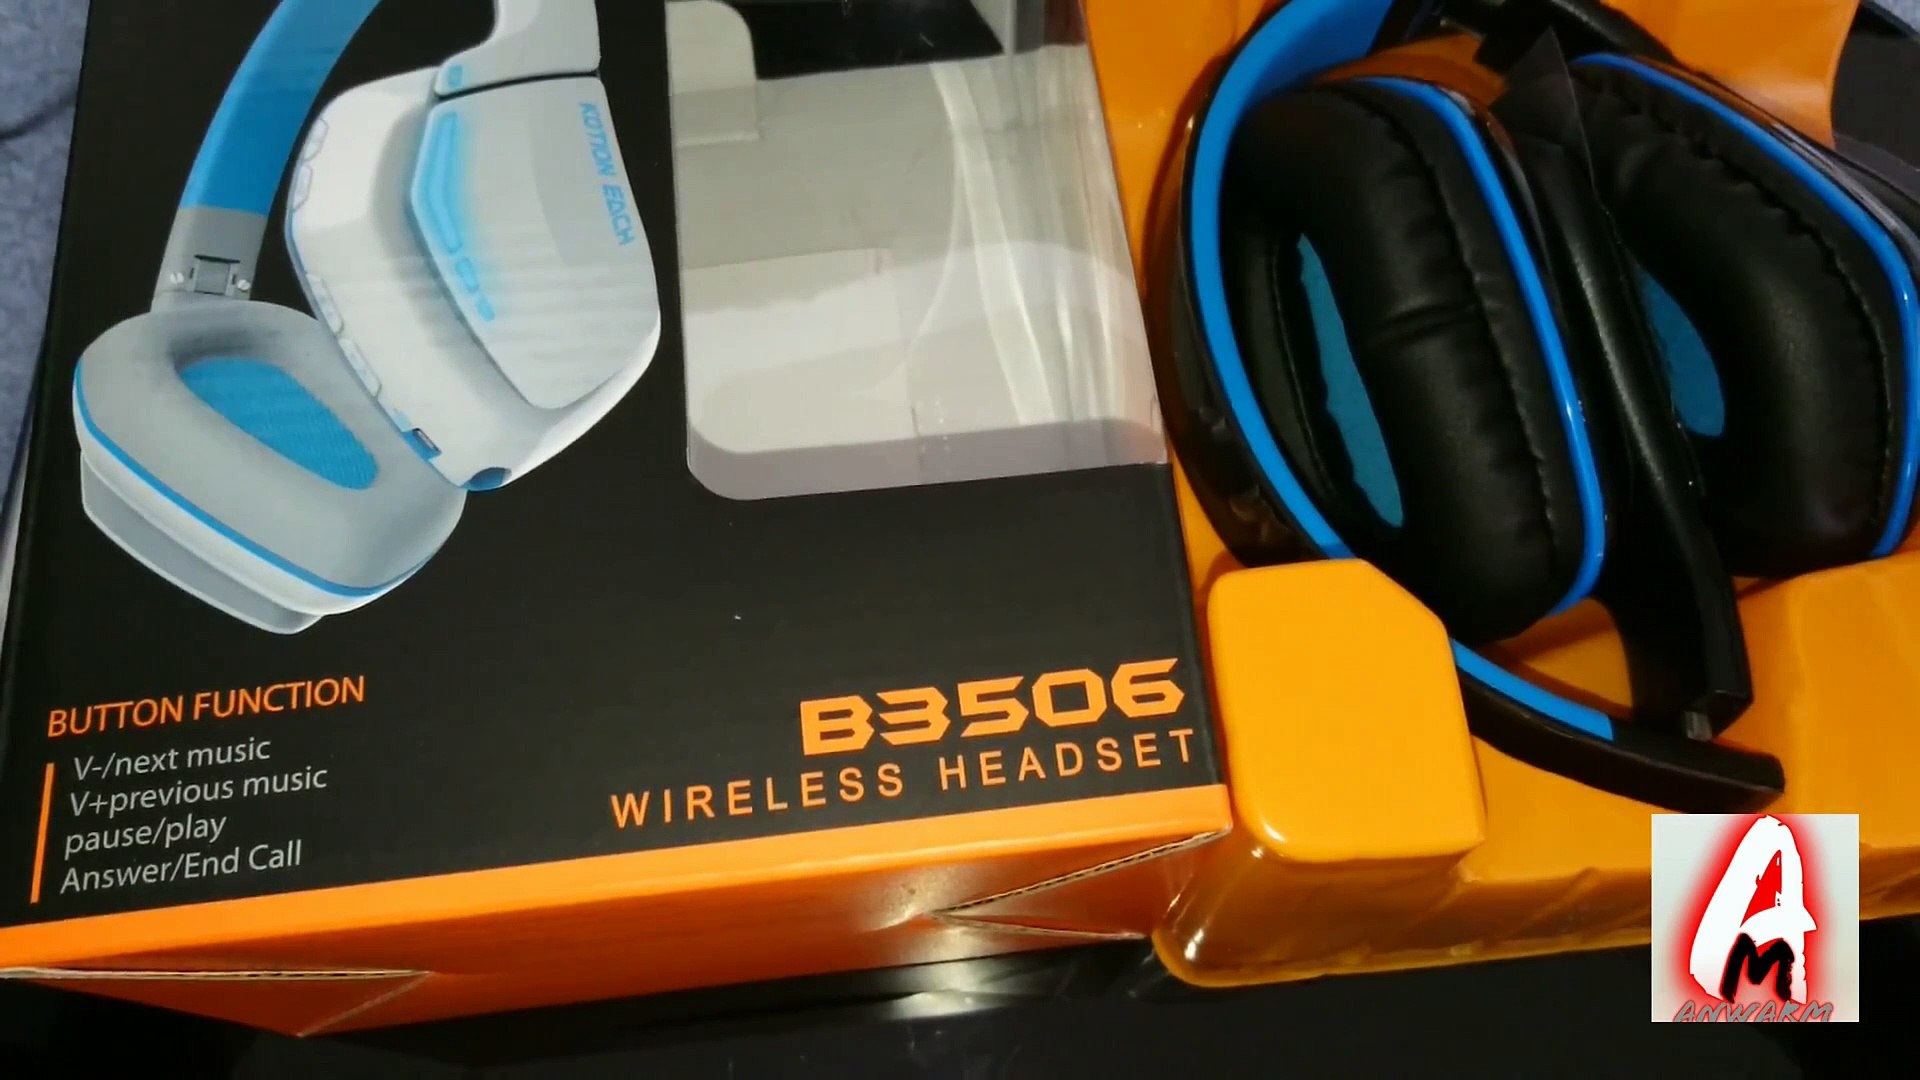 Kotion Each B3506 Wireless Gaming Headset (Review) - video Dailymotion